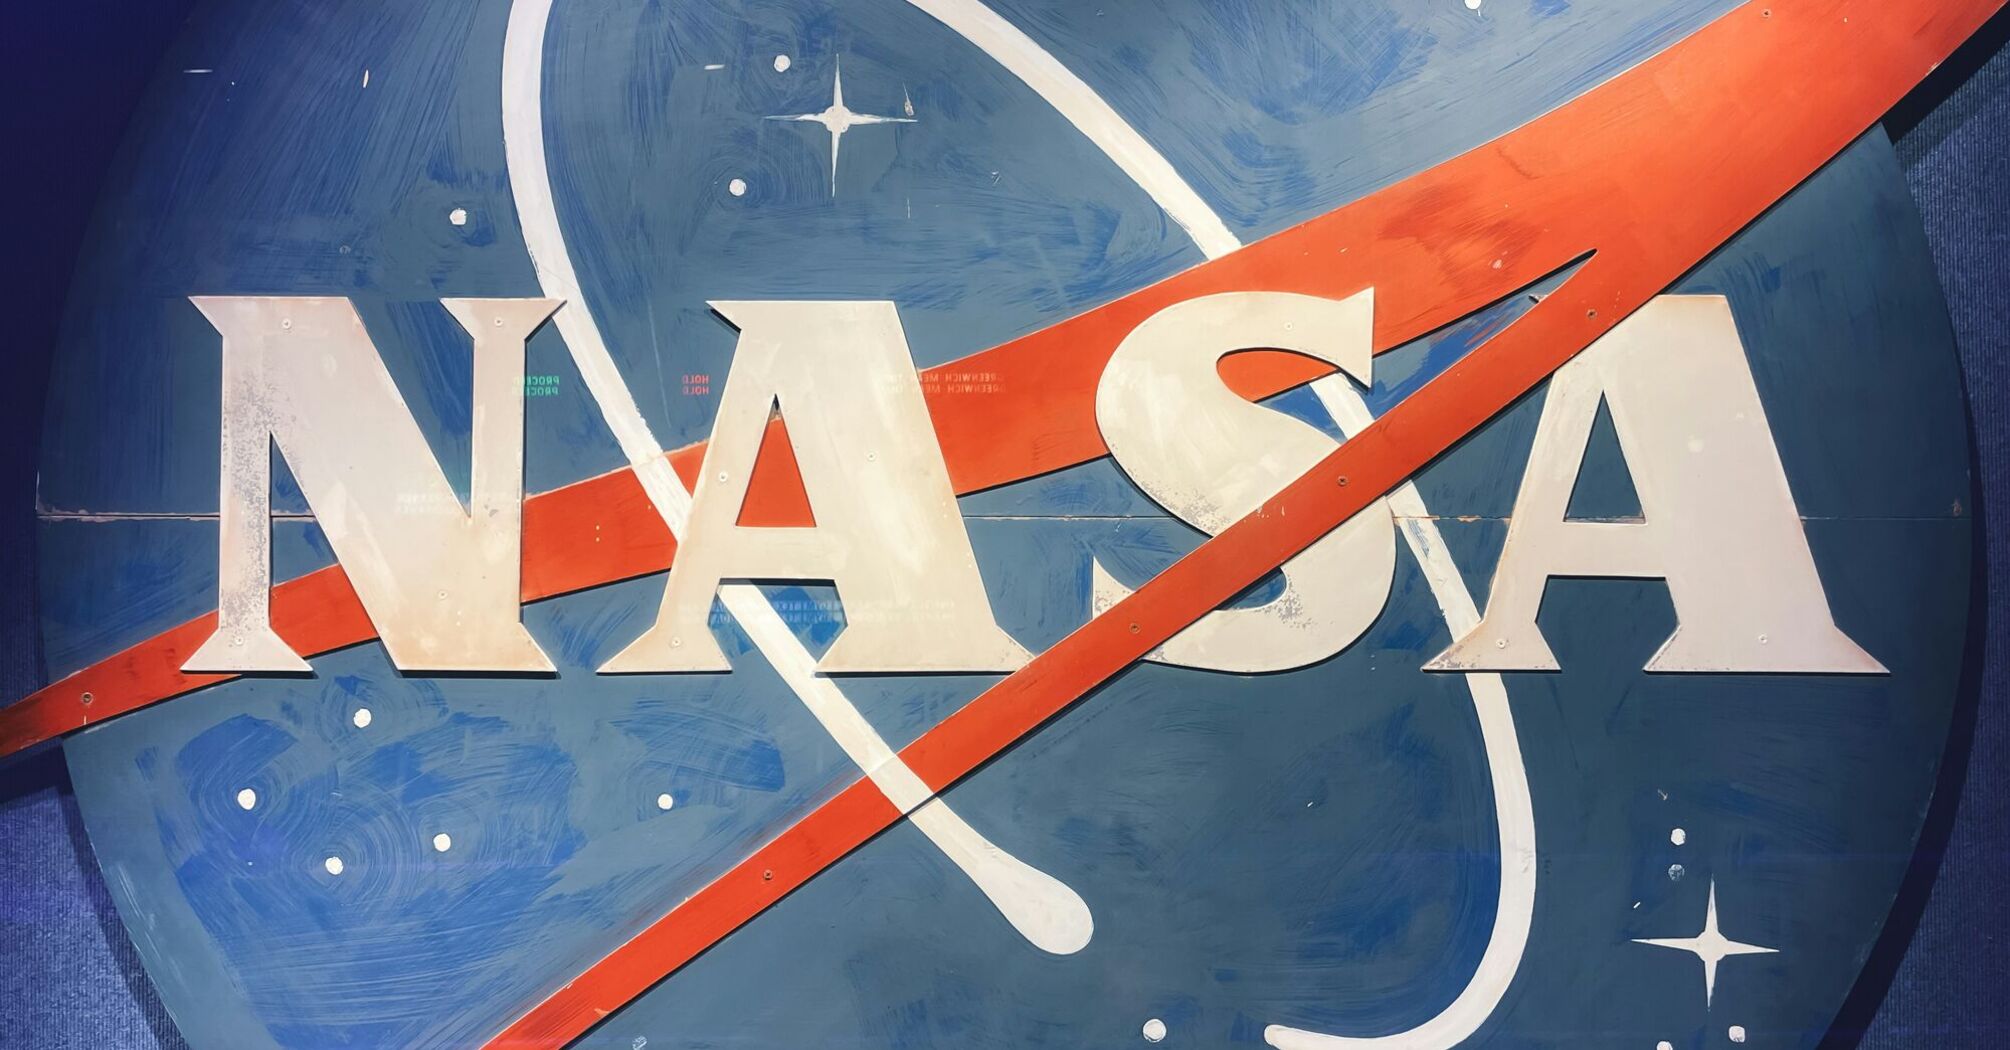 A close-up photo of a weathered NASA logo painted on a surface, featuring the iconic blue circular background with white stars, a red swoosh, and the white letters "NASA."